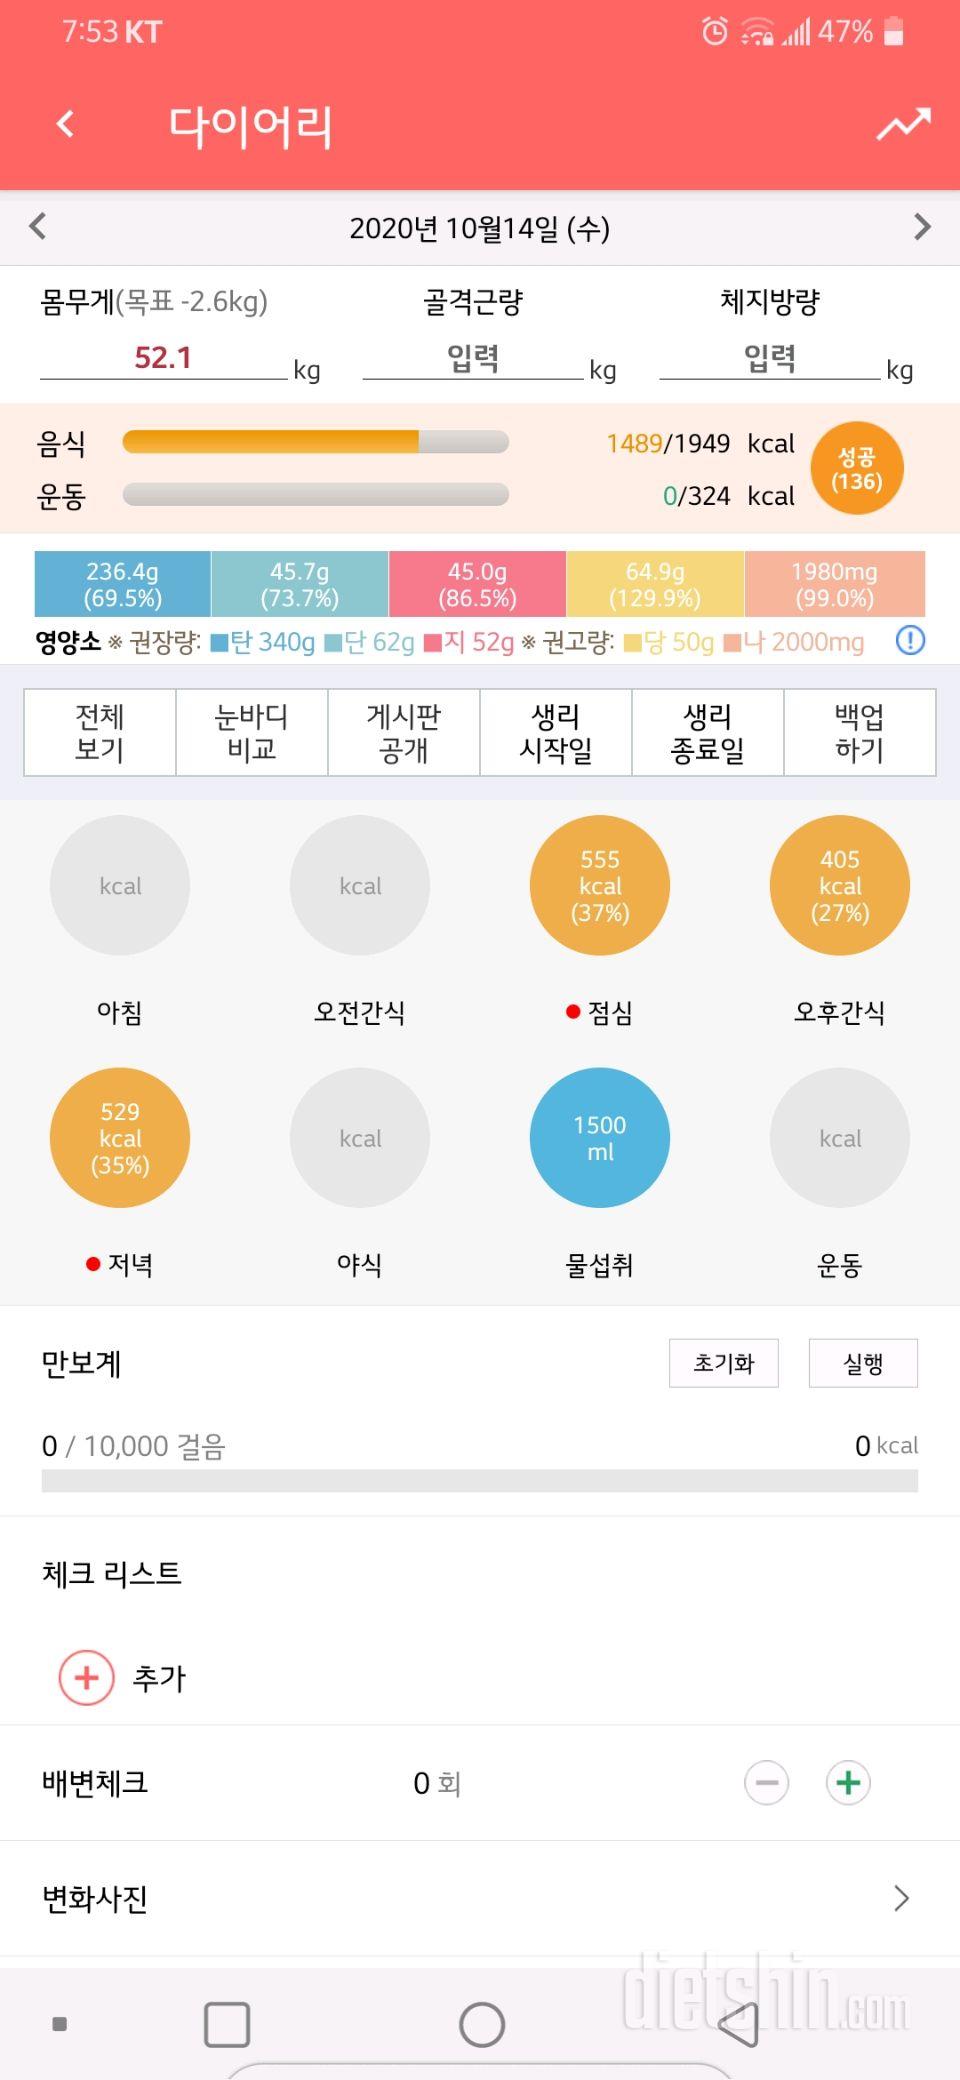 10월 14일 수욜